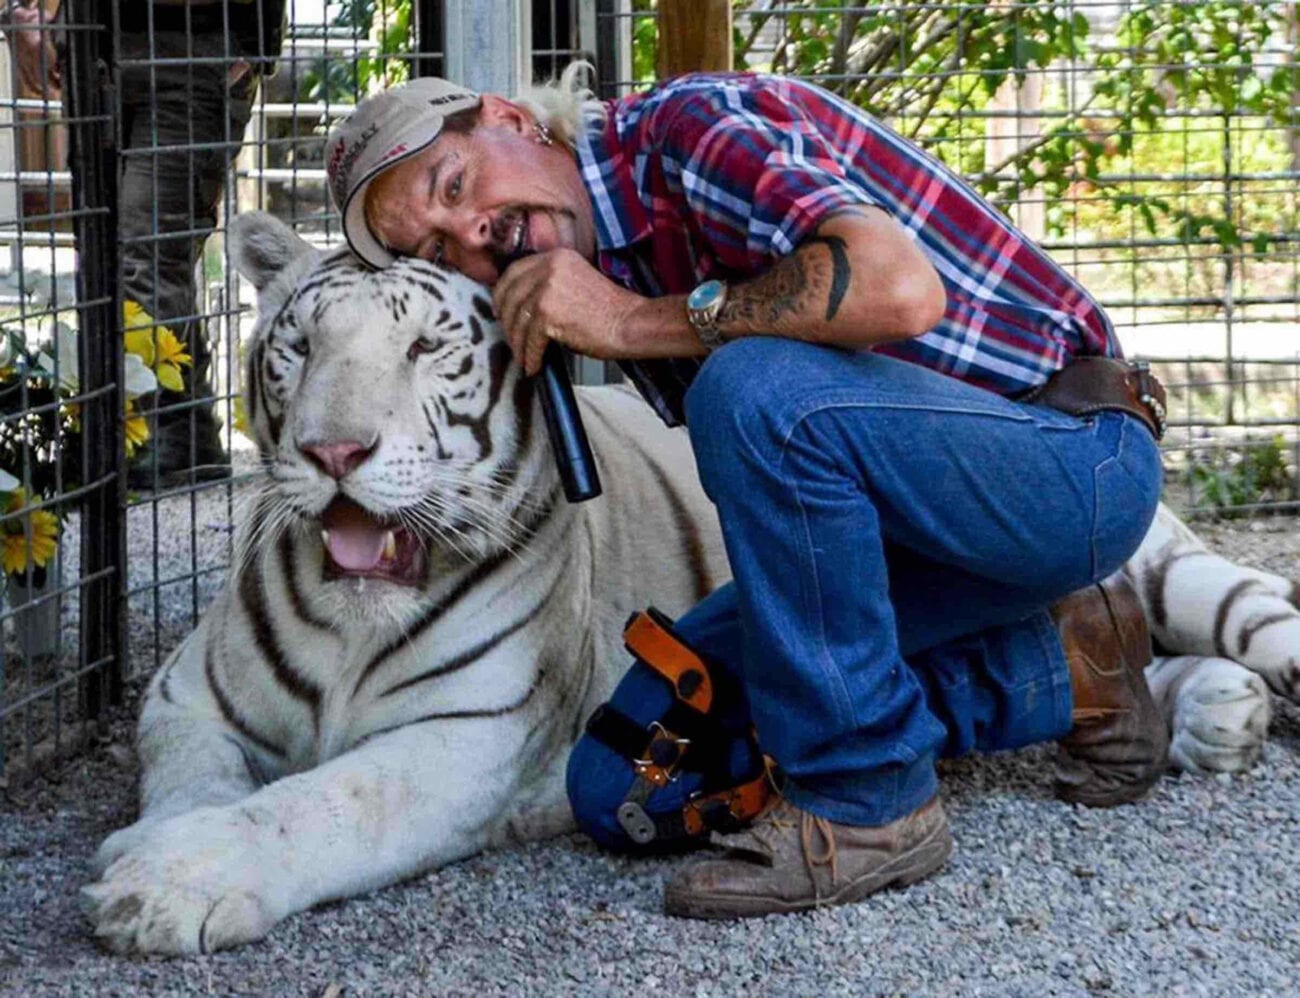 Joe Exotic impersonators are on the rise and some of them are so good we're fairly convinced it could confuse Joe's husbands.